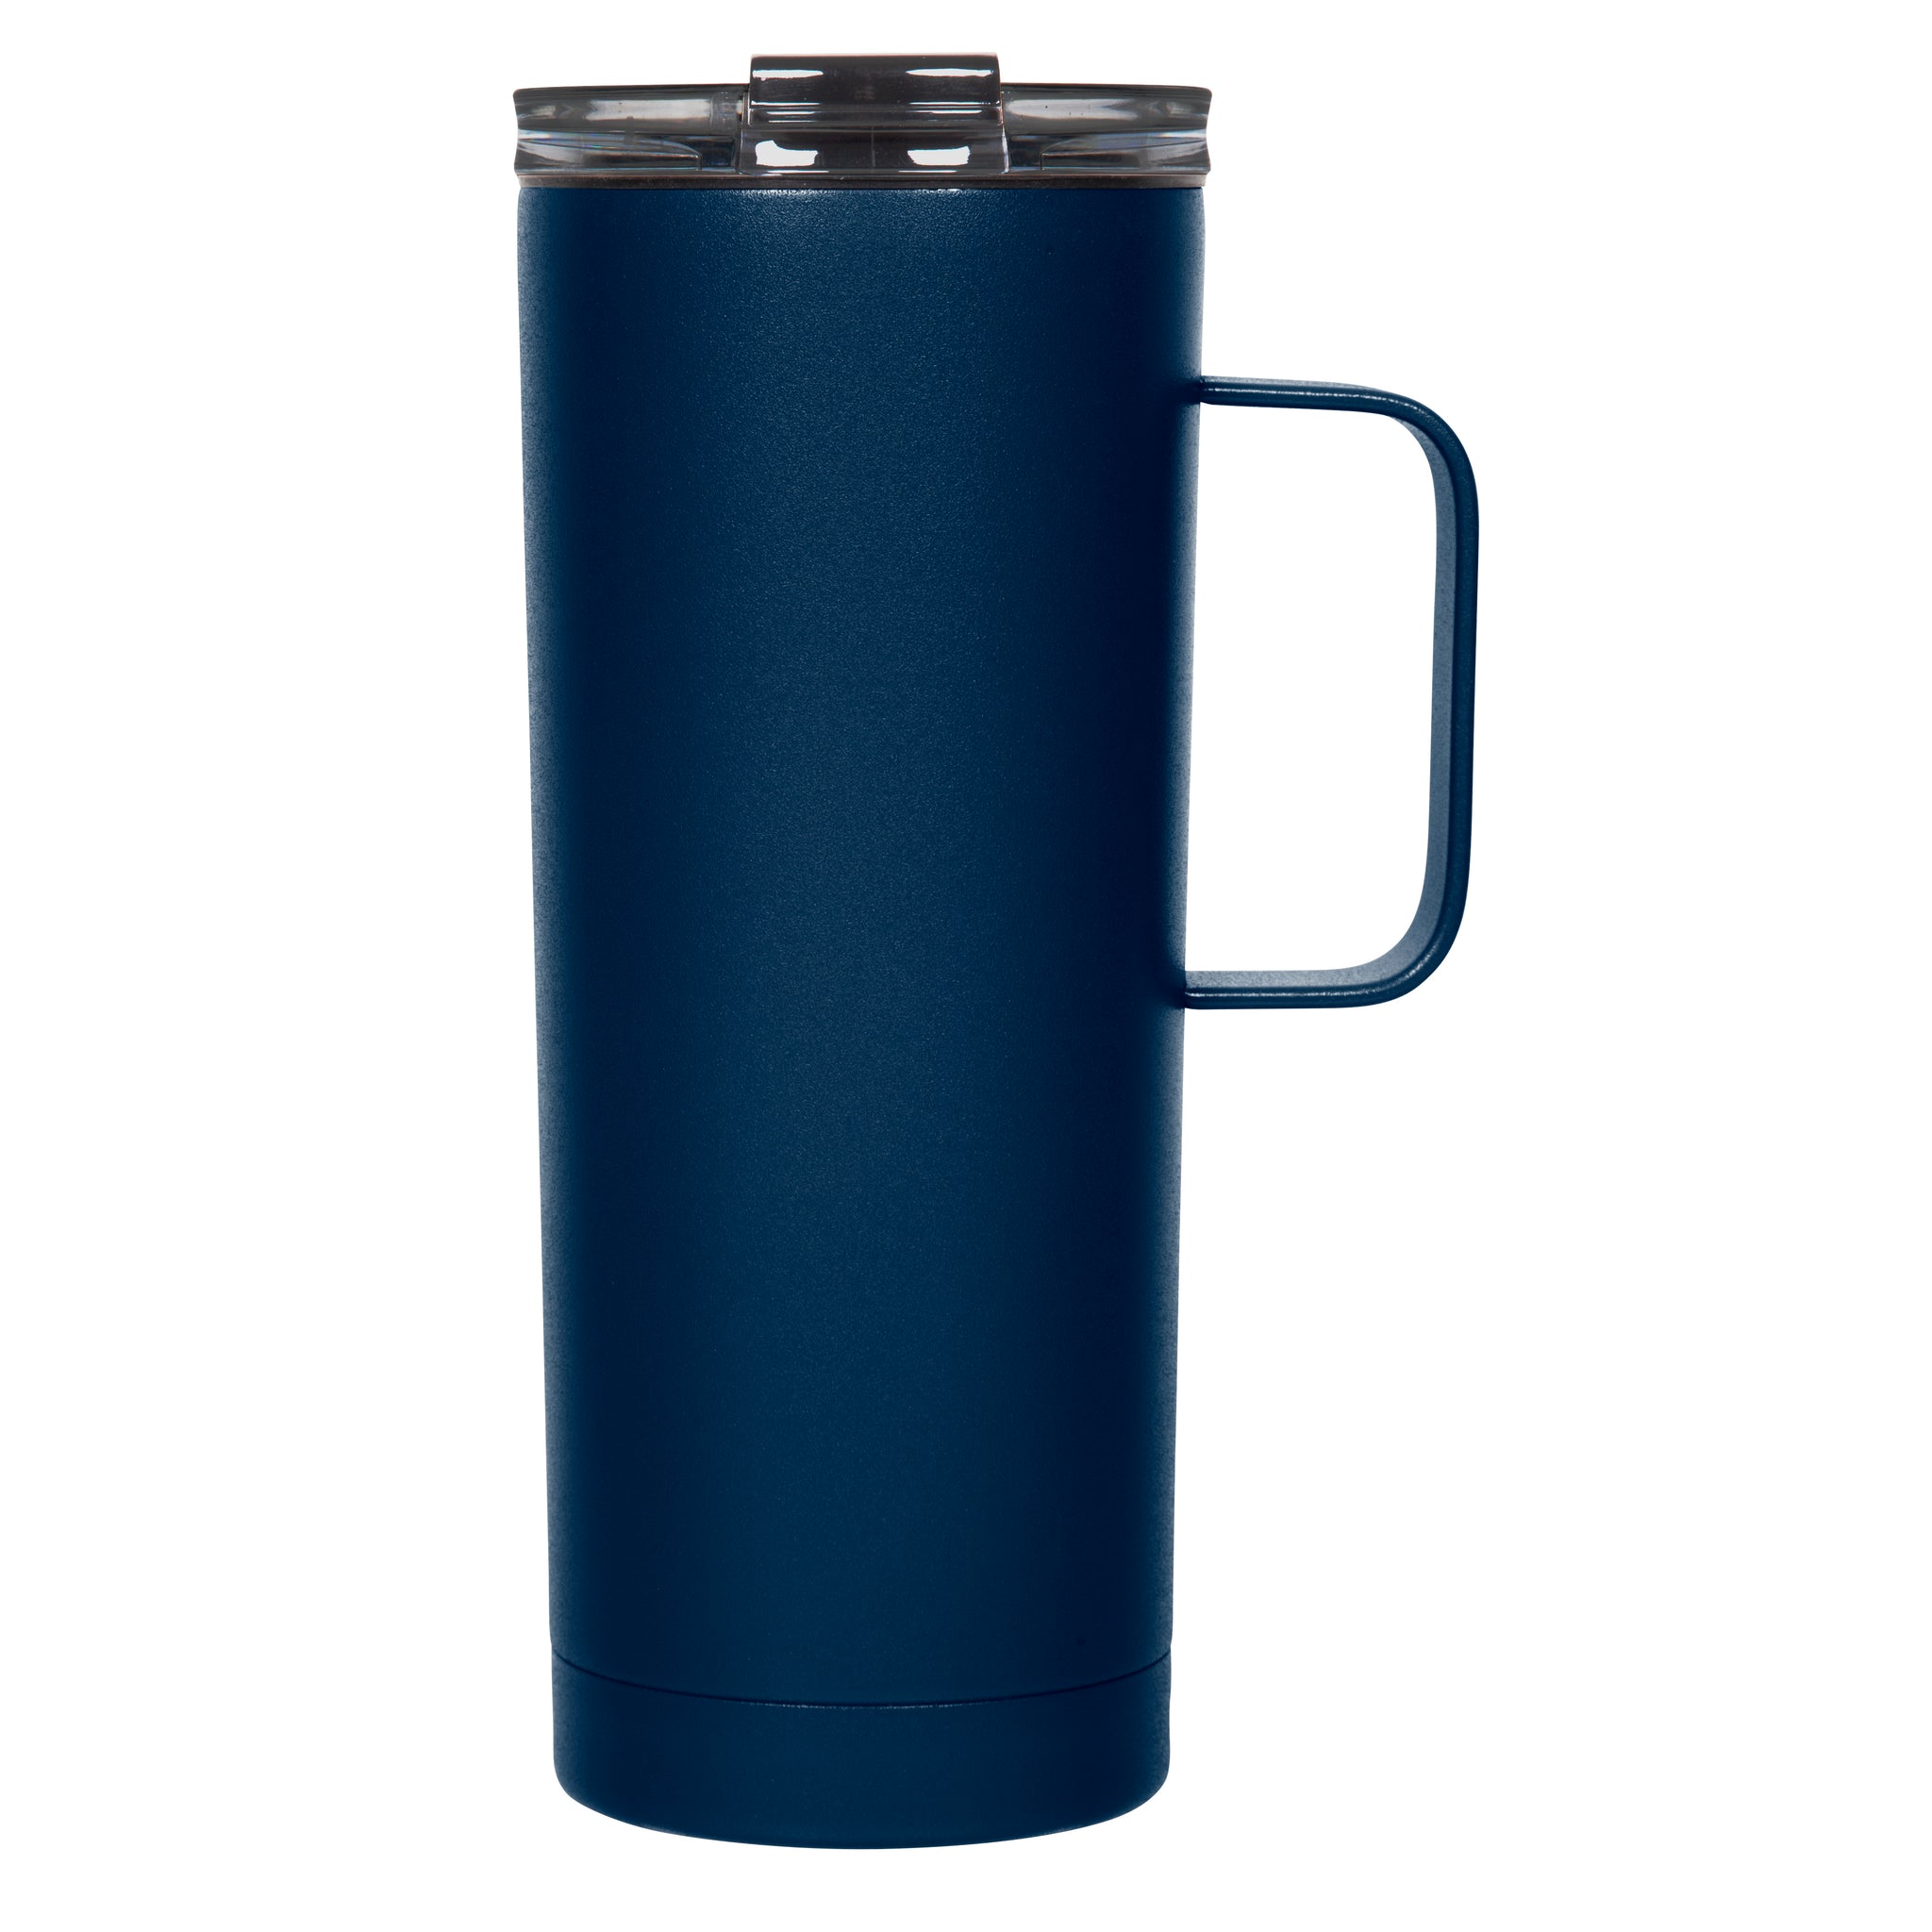 RTIC 20 oz Coffee Travel Mug with Lid and Handle, Stainless Steel Vacuum- Insulated, Hot and